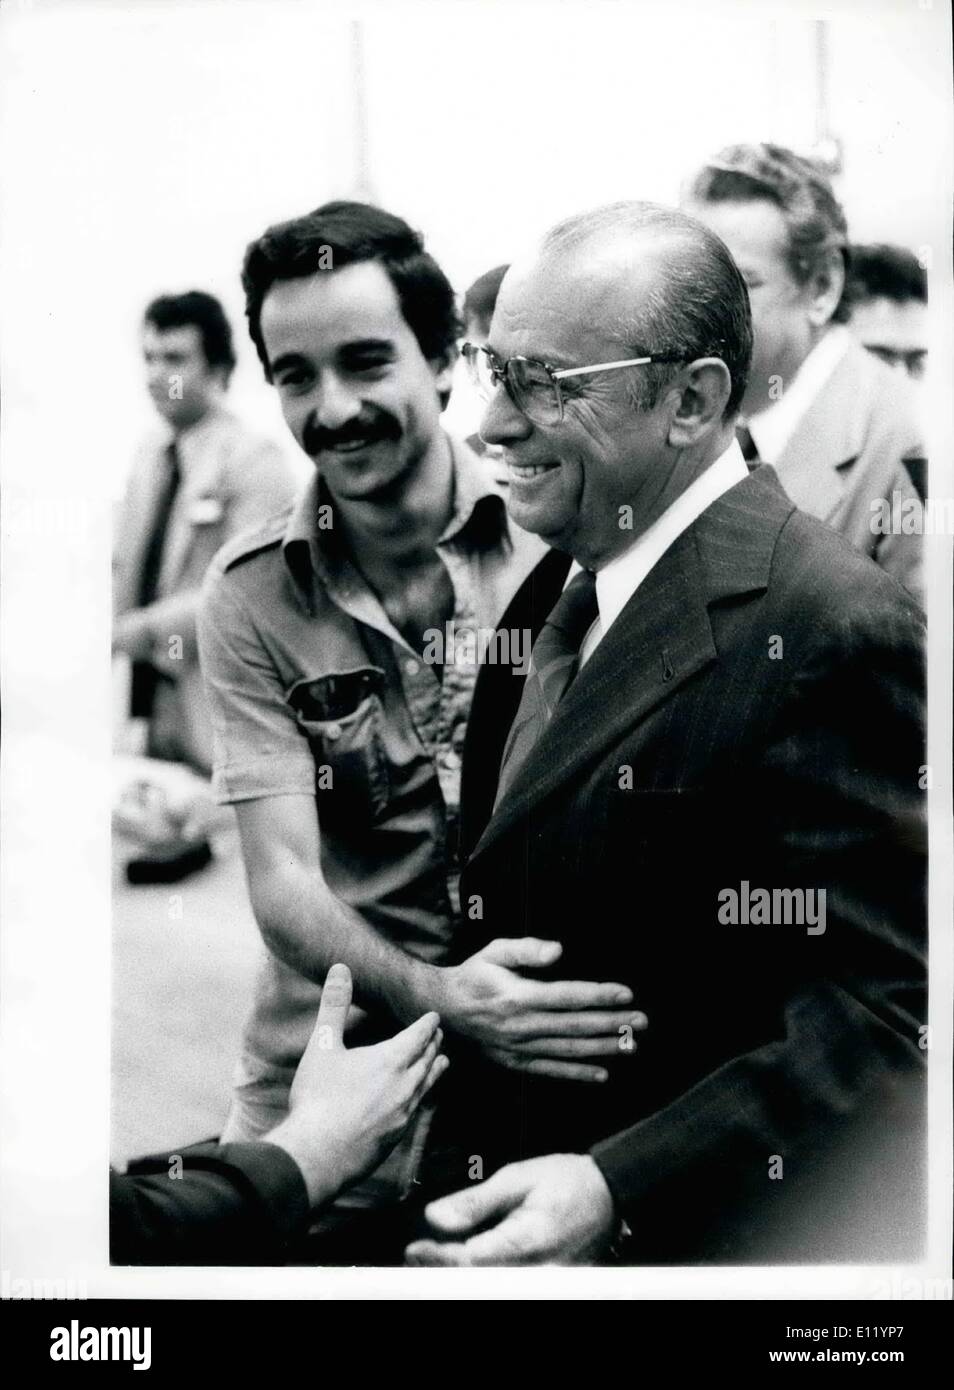 Apr. 04, 1981 - Figreilzeso, June 1978, meeting the people and string to smile in public soon after having been publicity Named Stock Photo